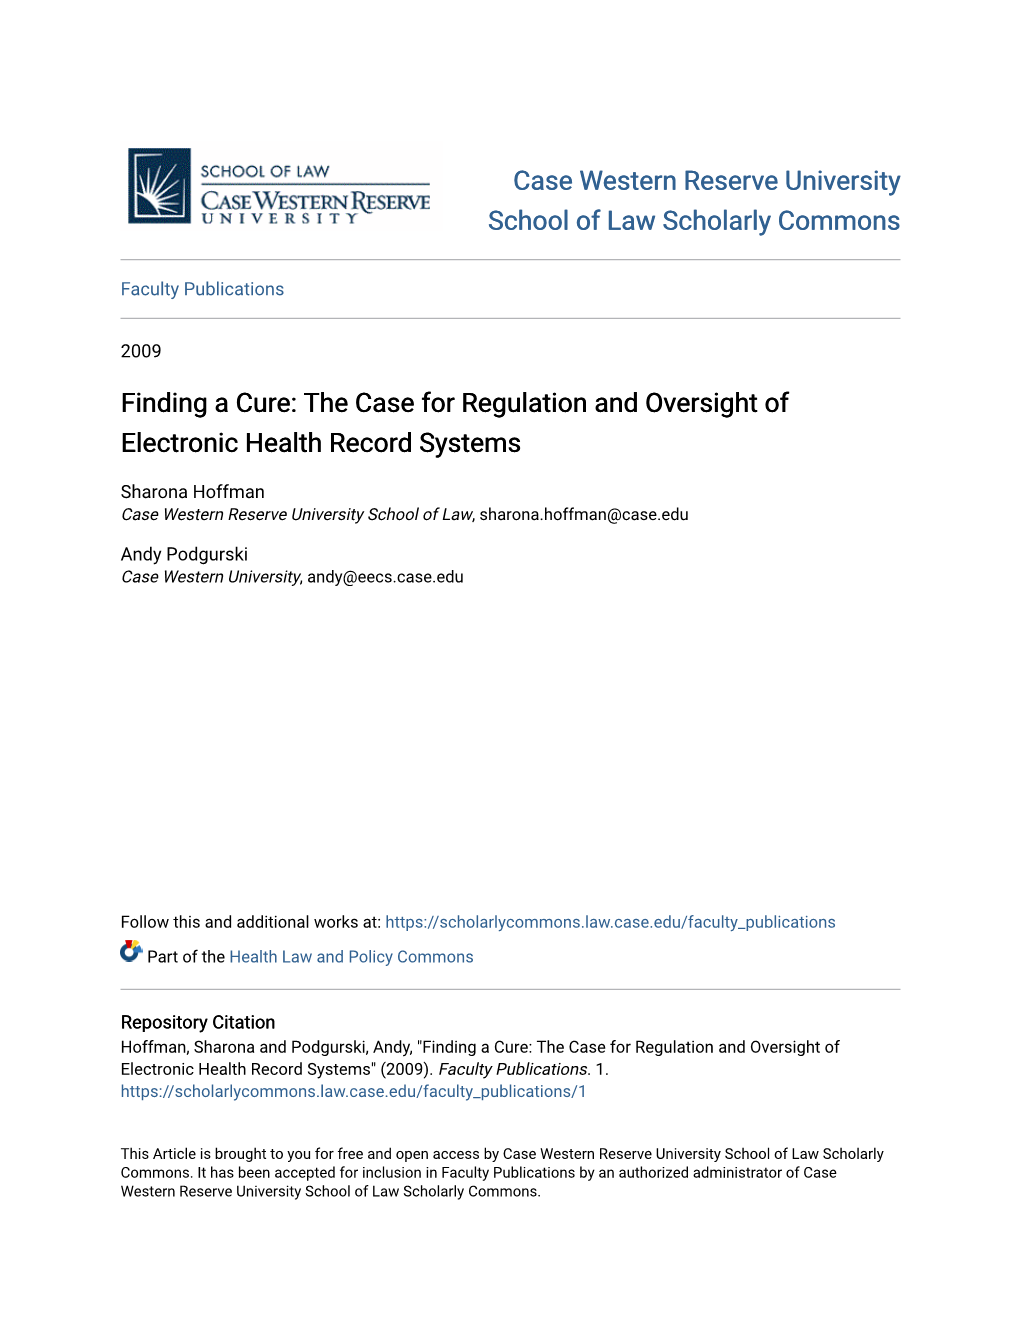 The Case for Regulation and Oversight of Electronic Health Record Systems